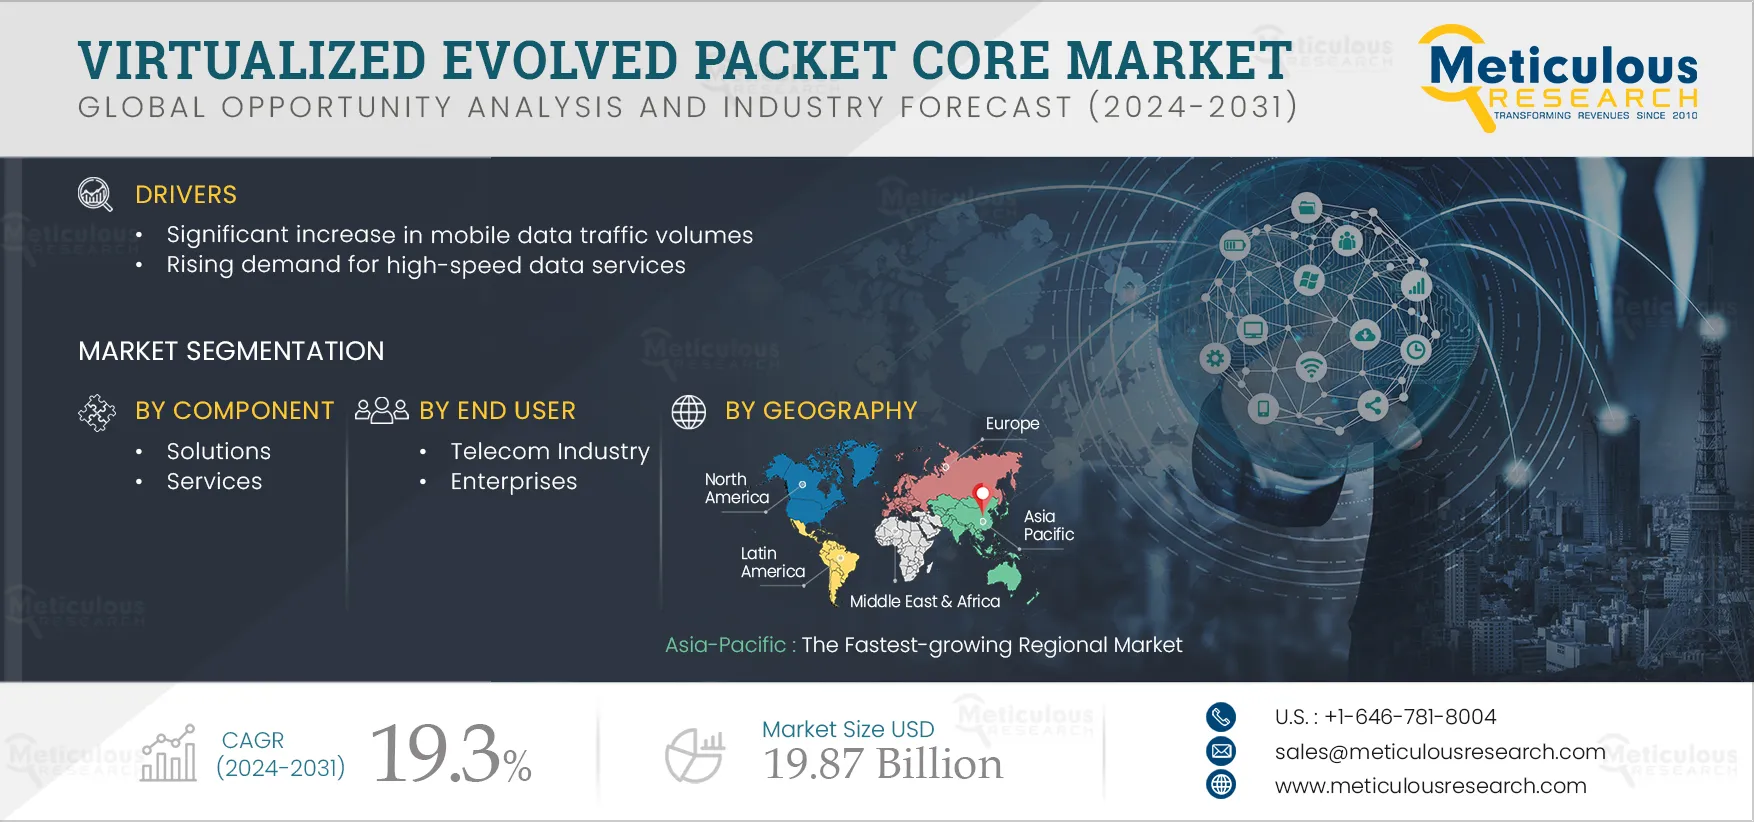 Virtualized Evolved Packet Core (vEPC) Market 